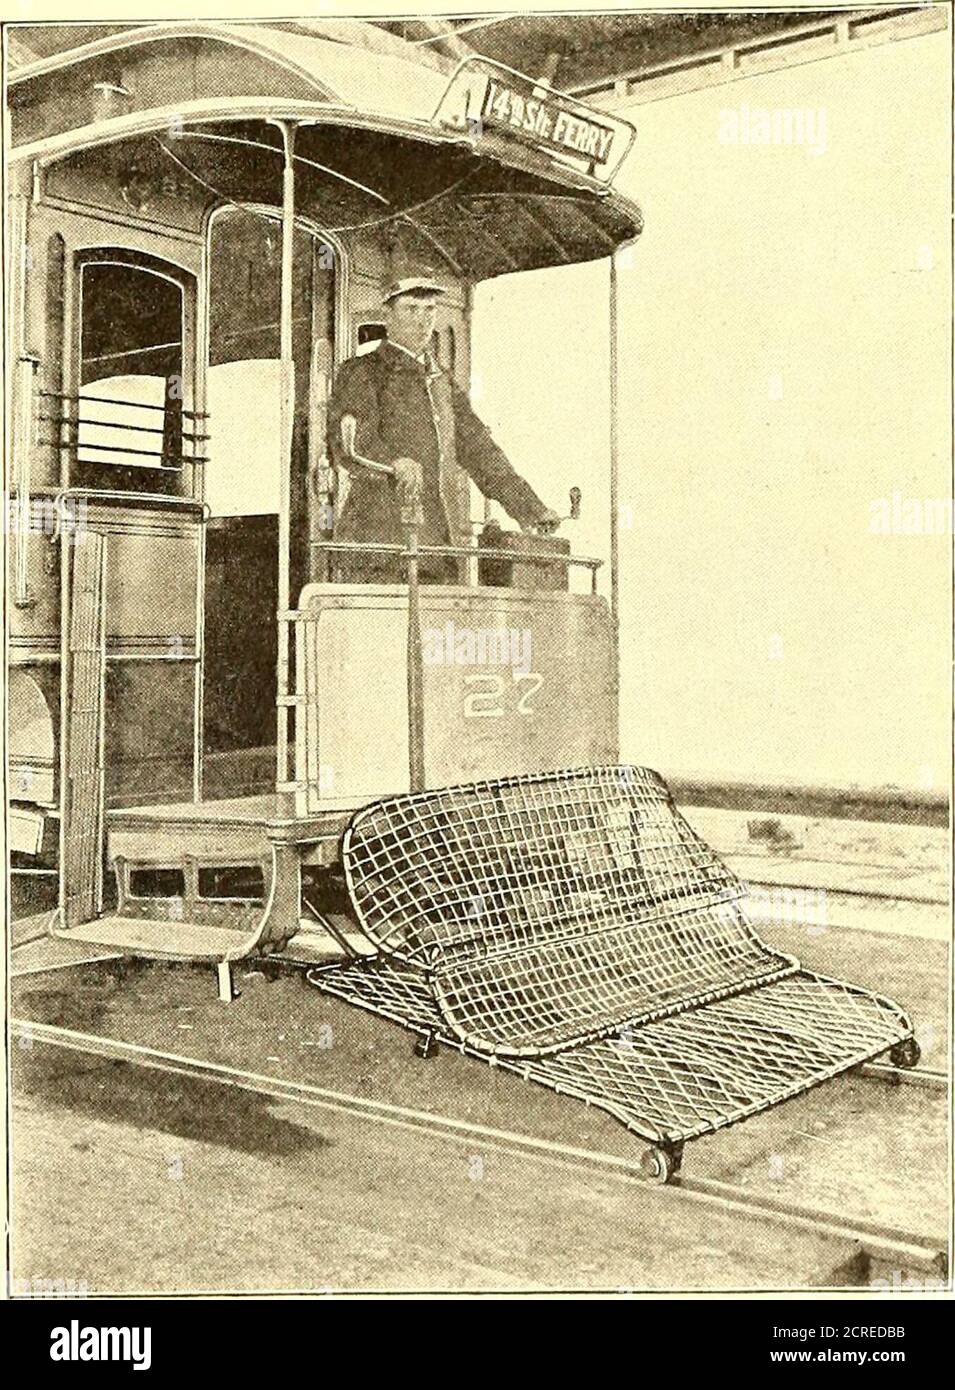 . The Street railway journal . n can be madeto run over the roadbed at a height above the track ofthree inches or less, according to the condition of theroadbed. The fender is attached to the truck of thecar in such a manner that it can be made to run flushwith the dashboard, thereby making it possible to trailcars without any delay or inconvenience. The safetyguard when struck automatically releases a cradle whichinstantaneously drops from beneath the platform of thecar and runs forward on wheels on the crown of the track,three feet in front of the car, and prevents any possibilityof the crus Stock Photo